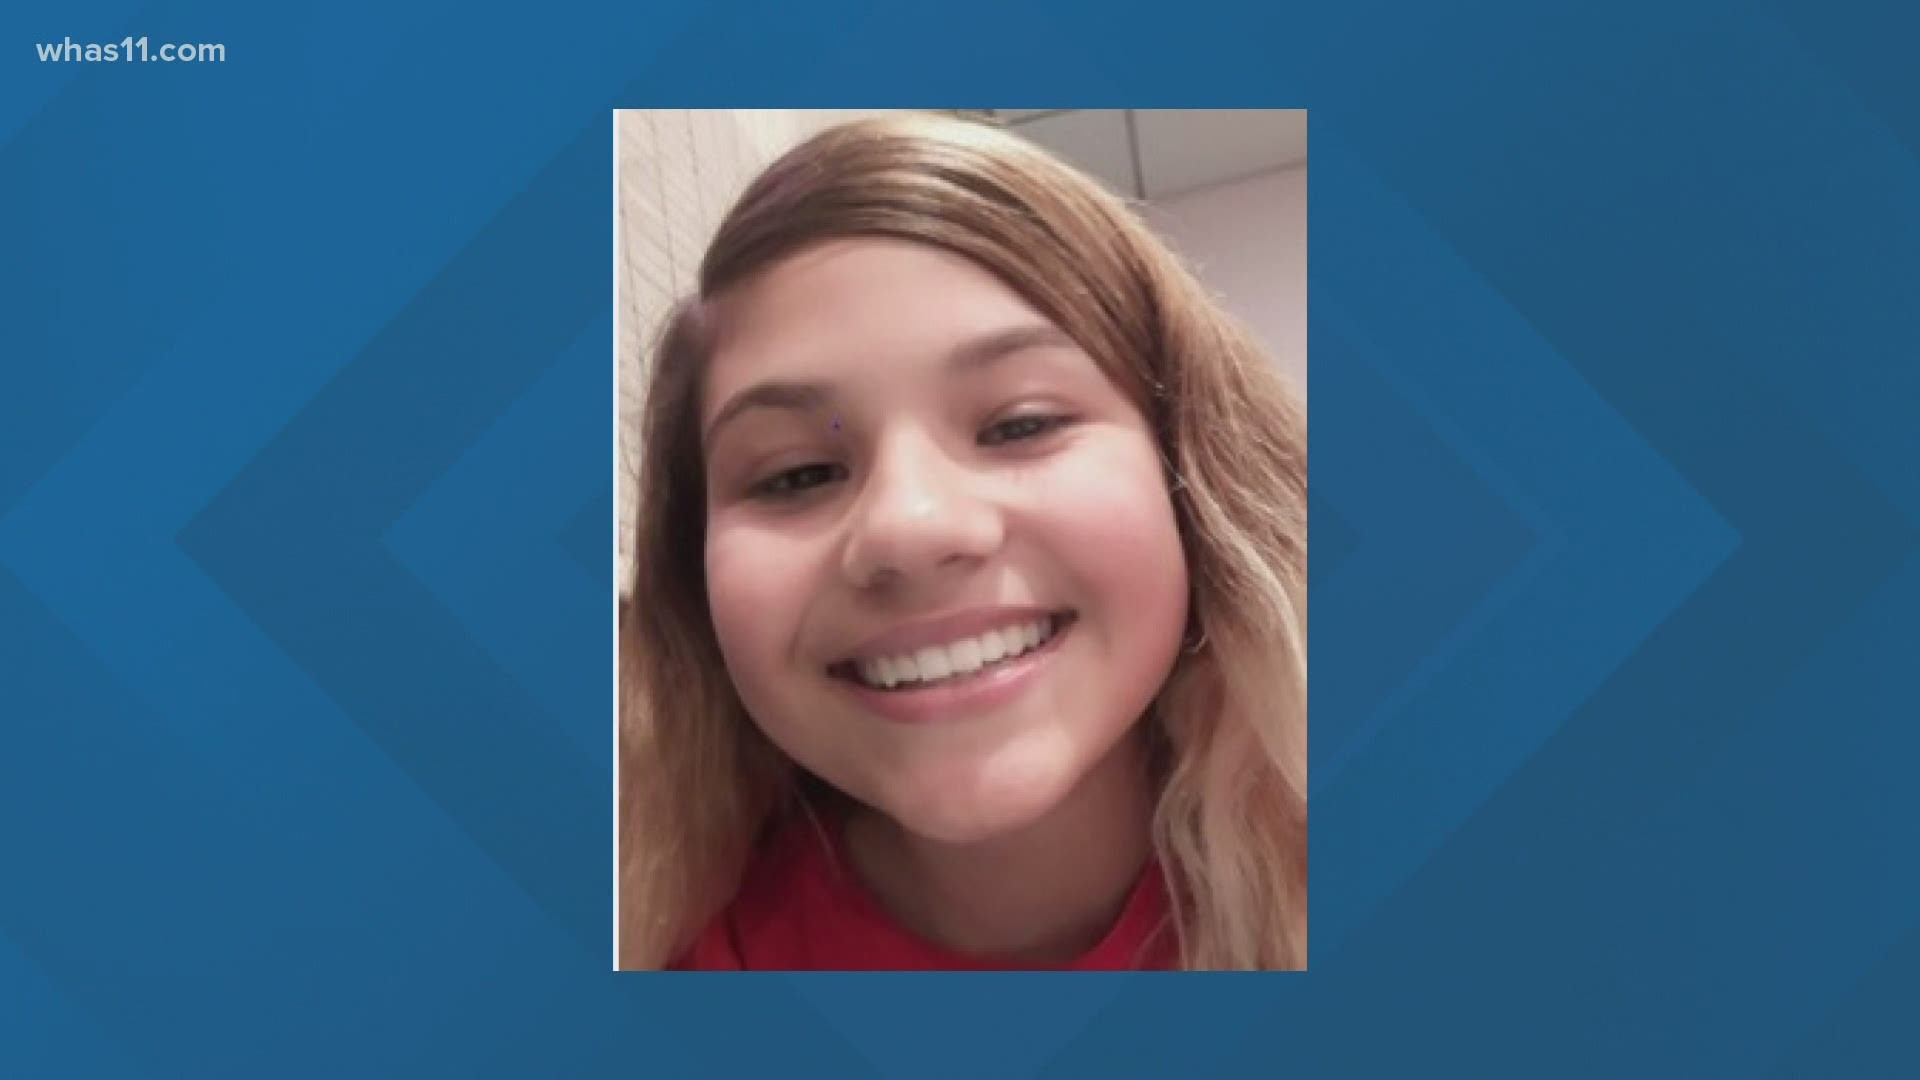 Ruby Calderon is about 5-foot-3 with brown hair and brown eyes. Police say she walked away from the 4600 block of Shenandoah drive several days ago.